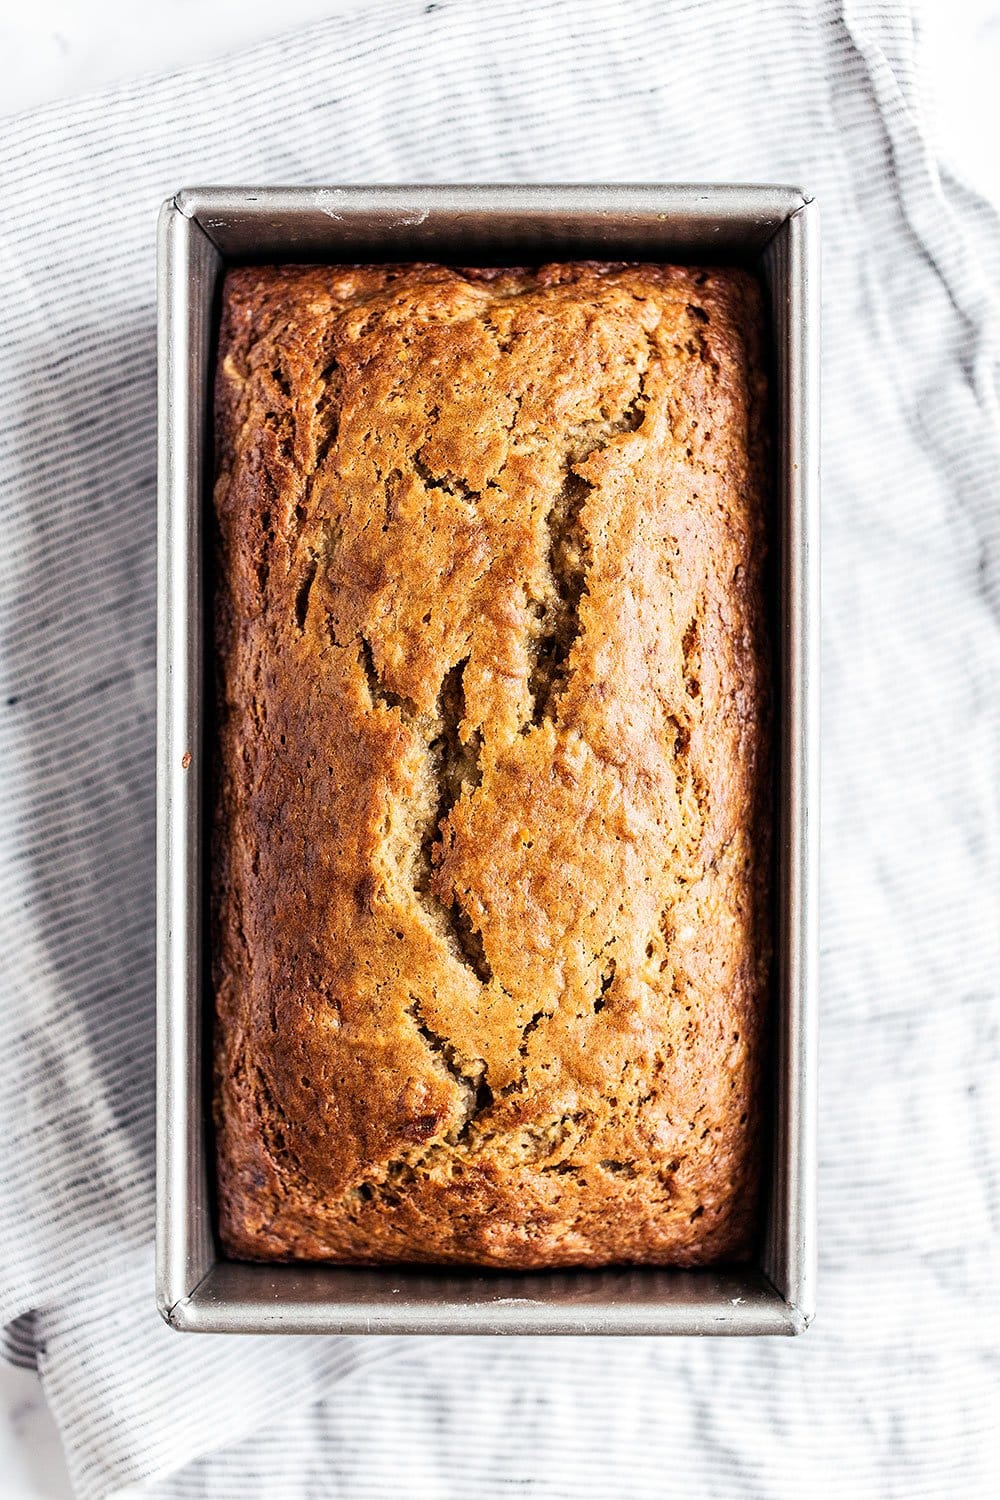 This is the best ever easy banana bread recipe with a super moist and tender texture and tons of sweet banana flavor. Everyone loves this recipe!